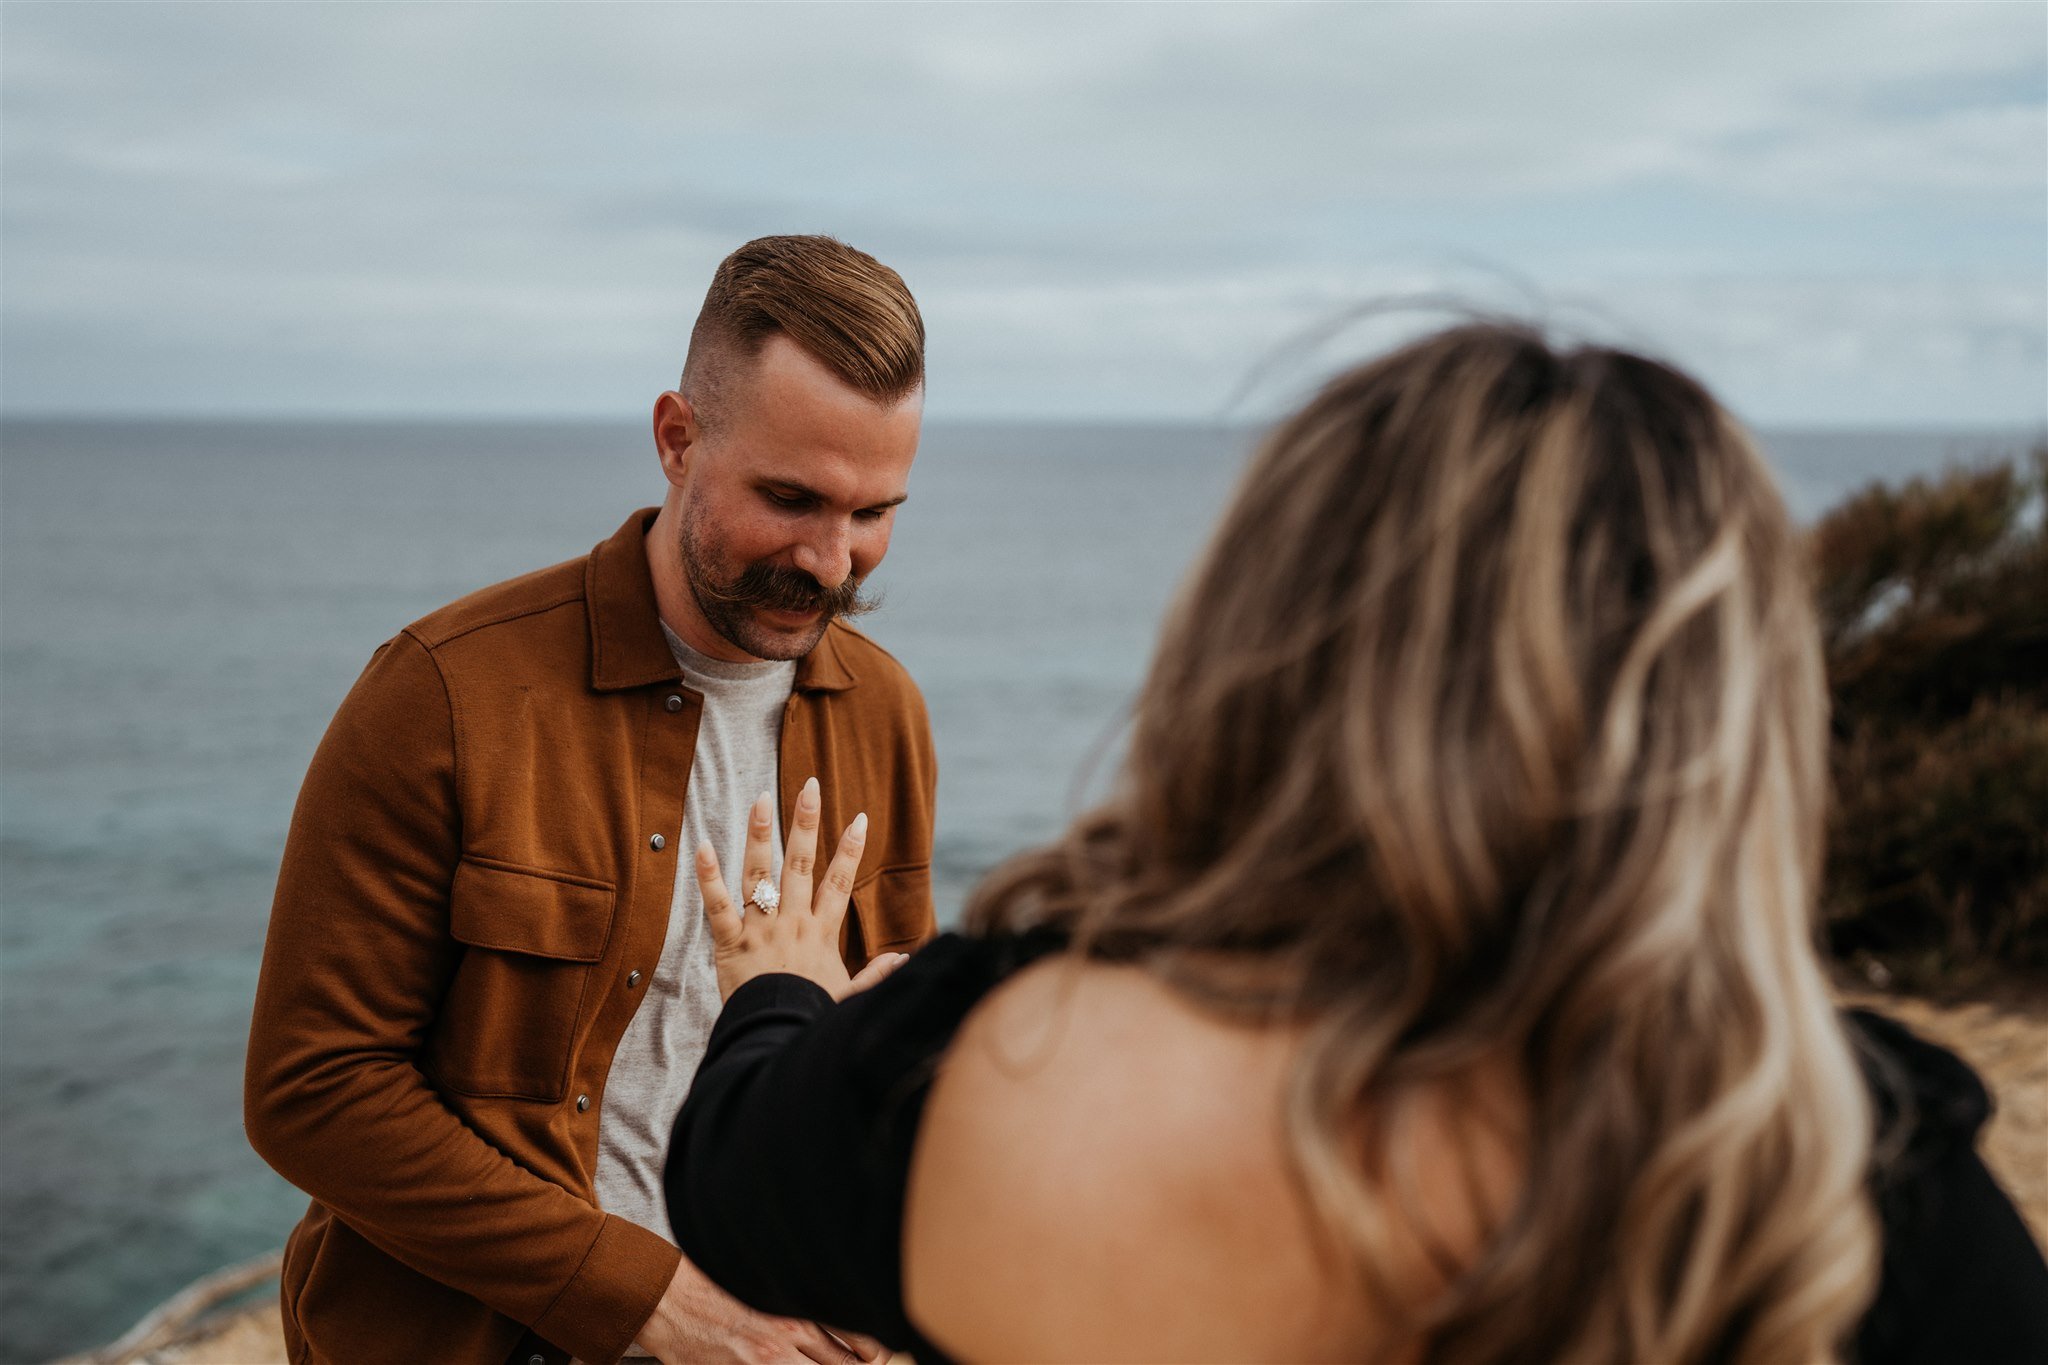 Woman holding out hand after surprise proposal in Kauai, Hawaii